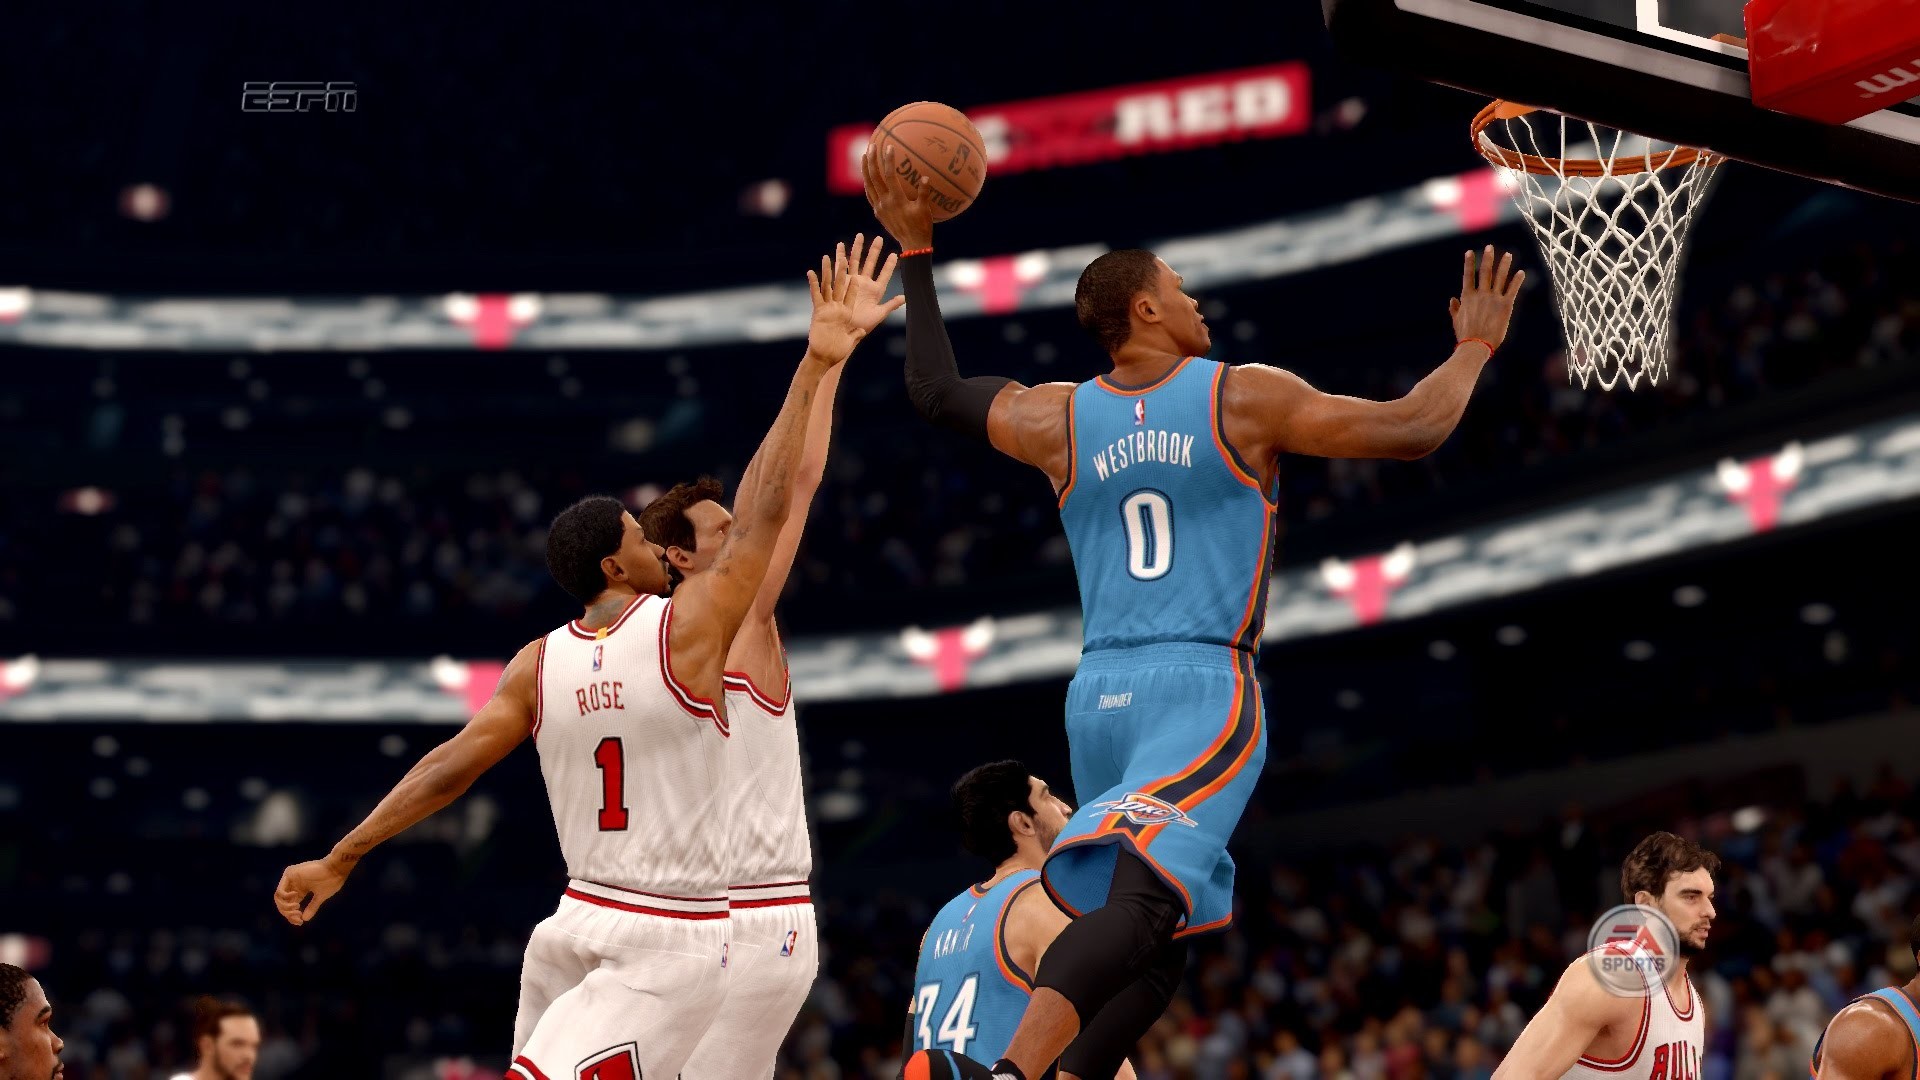 1920x1080 NBA LIVE 16 - Russel Westbrook Sick 1 Handed Dunk [1080p 60fps] - YouTube